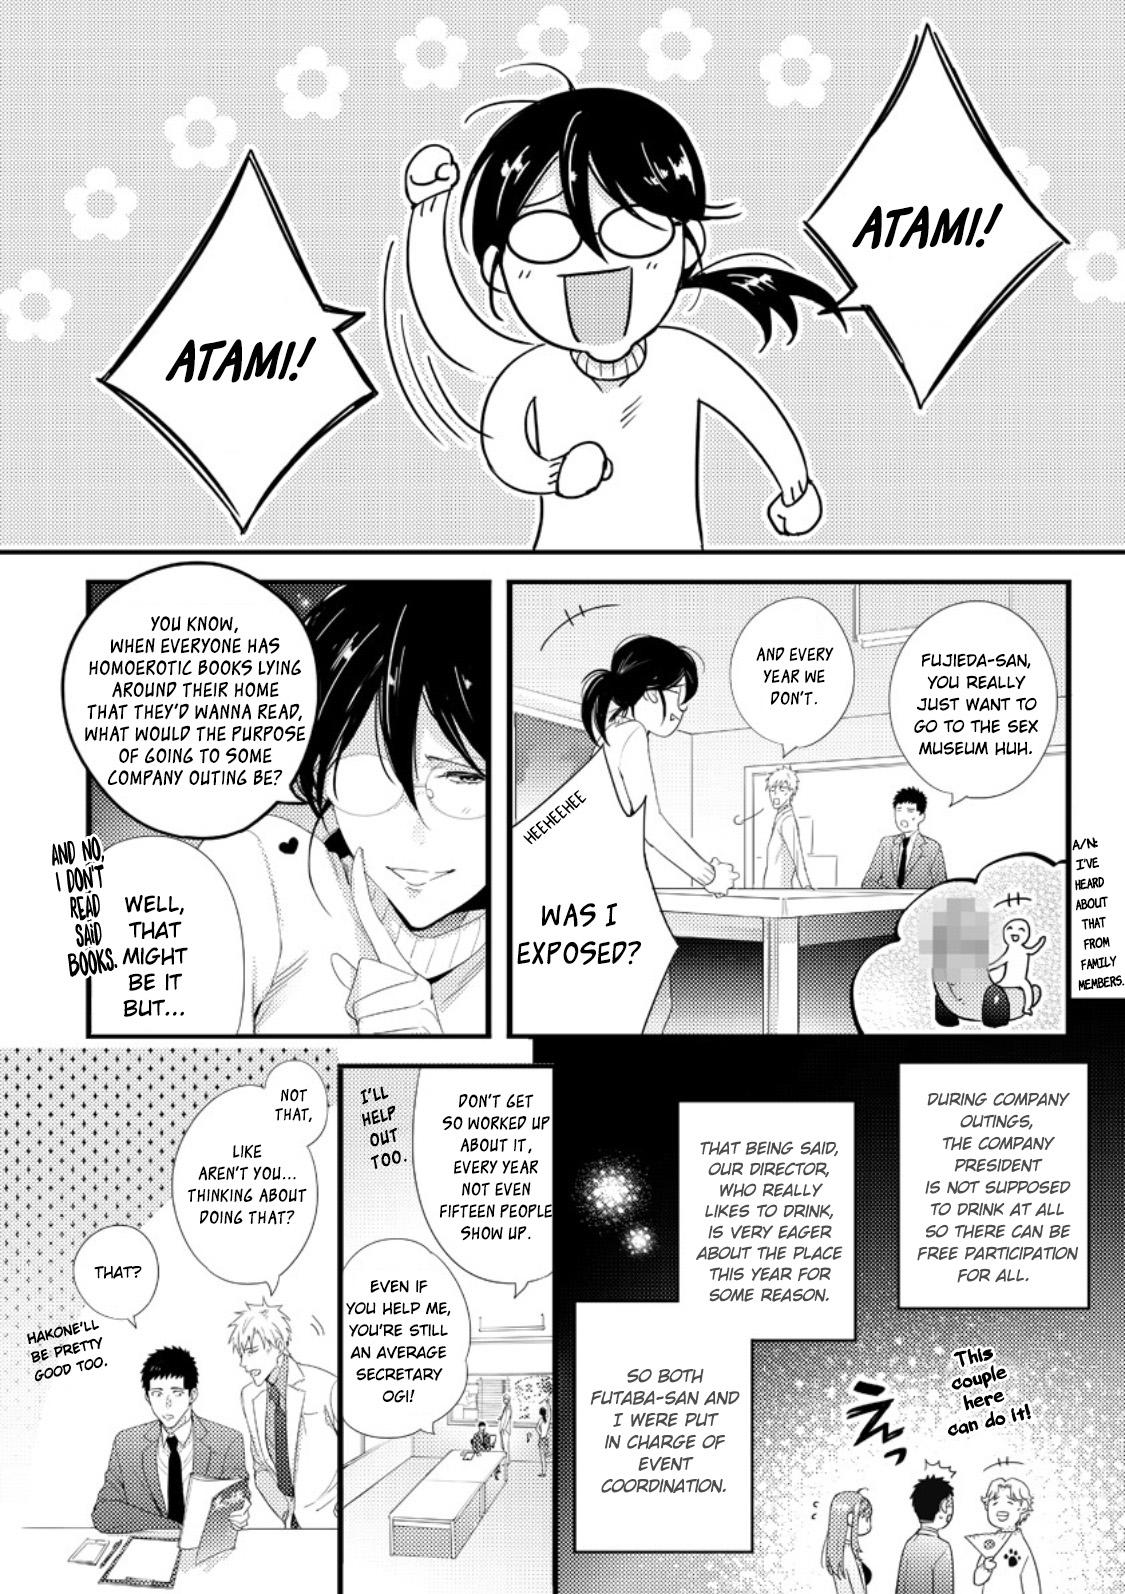 Spandex Please Let Me Hold You Futaba-san! Petite Teen - Page 4